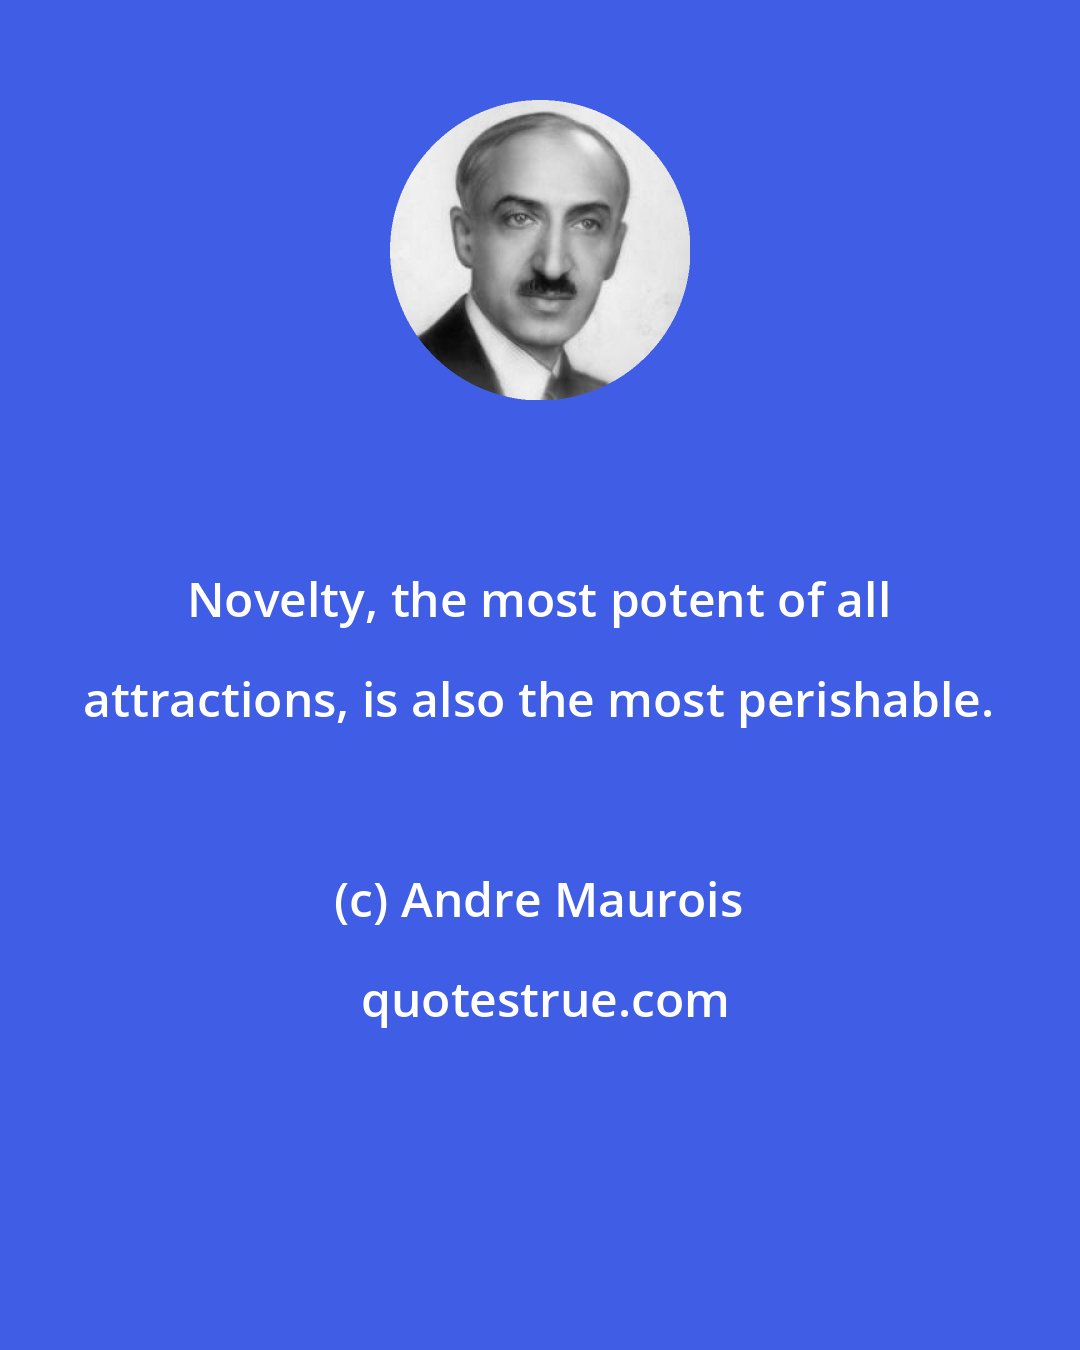 Andre Maurois: Novelty, the most potent of all attractions, is also the most perishable.